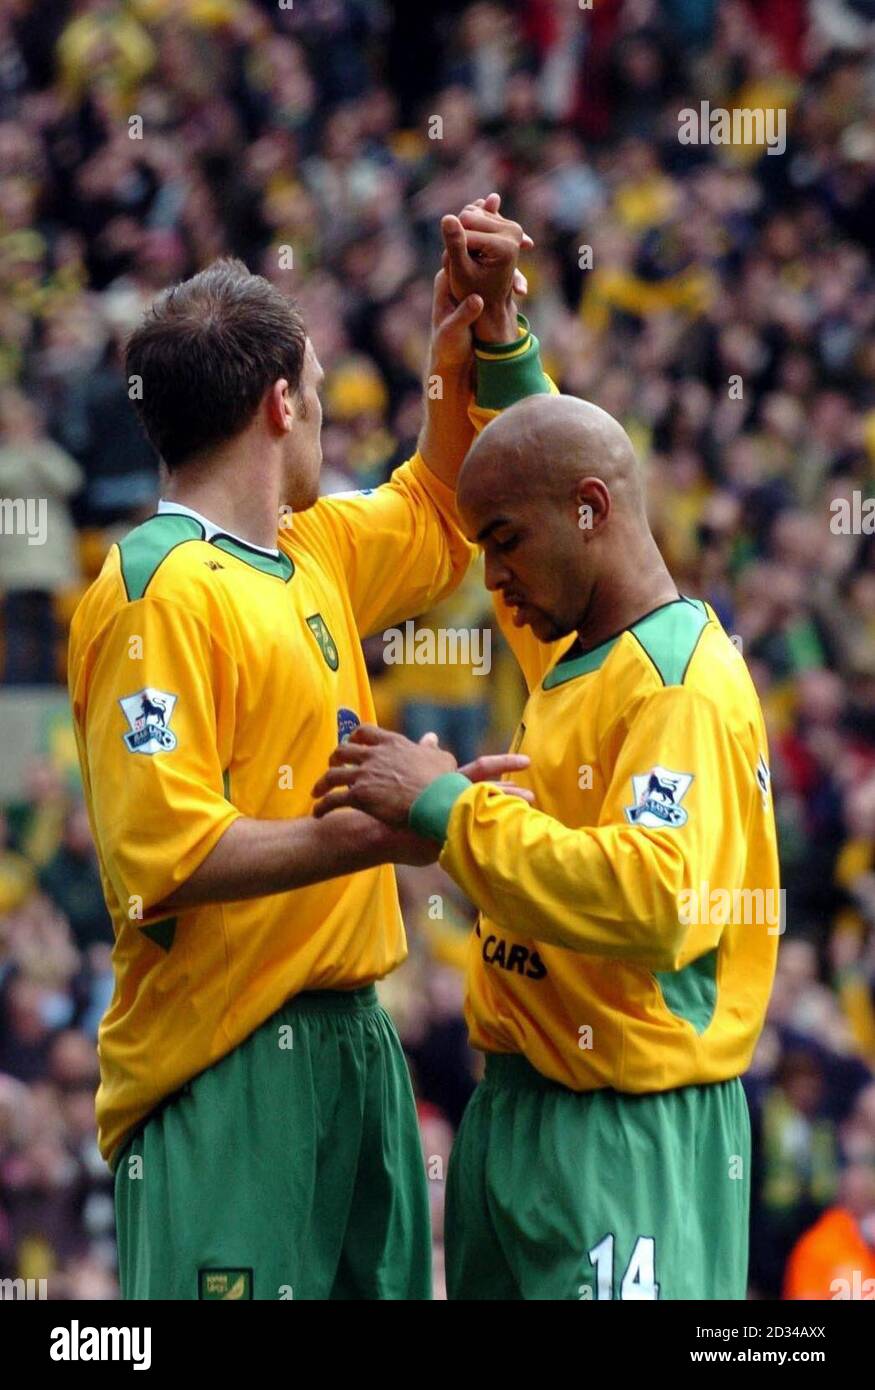 Norwich City's Dean Ashton [L] is congratulated by team-mate Leon McKenzie after scoring a penalty against Birmingham City. Stock Photo